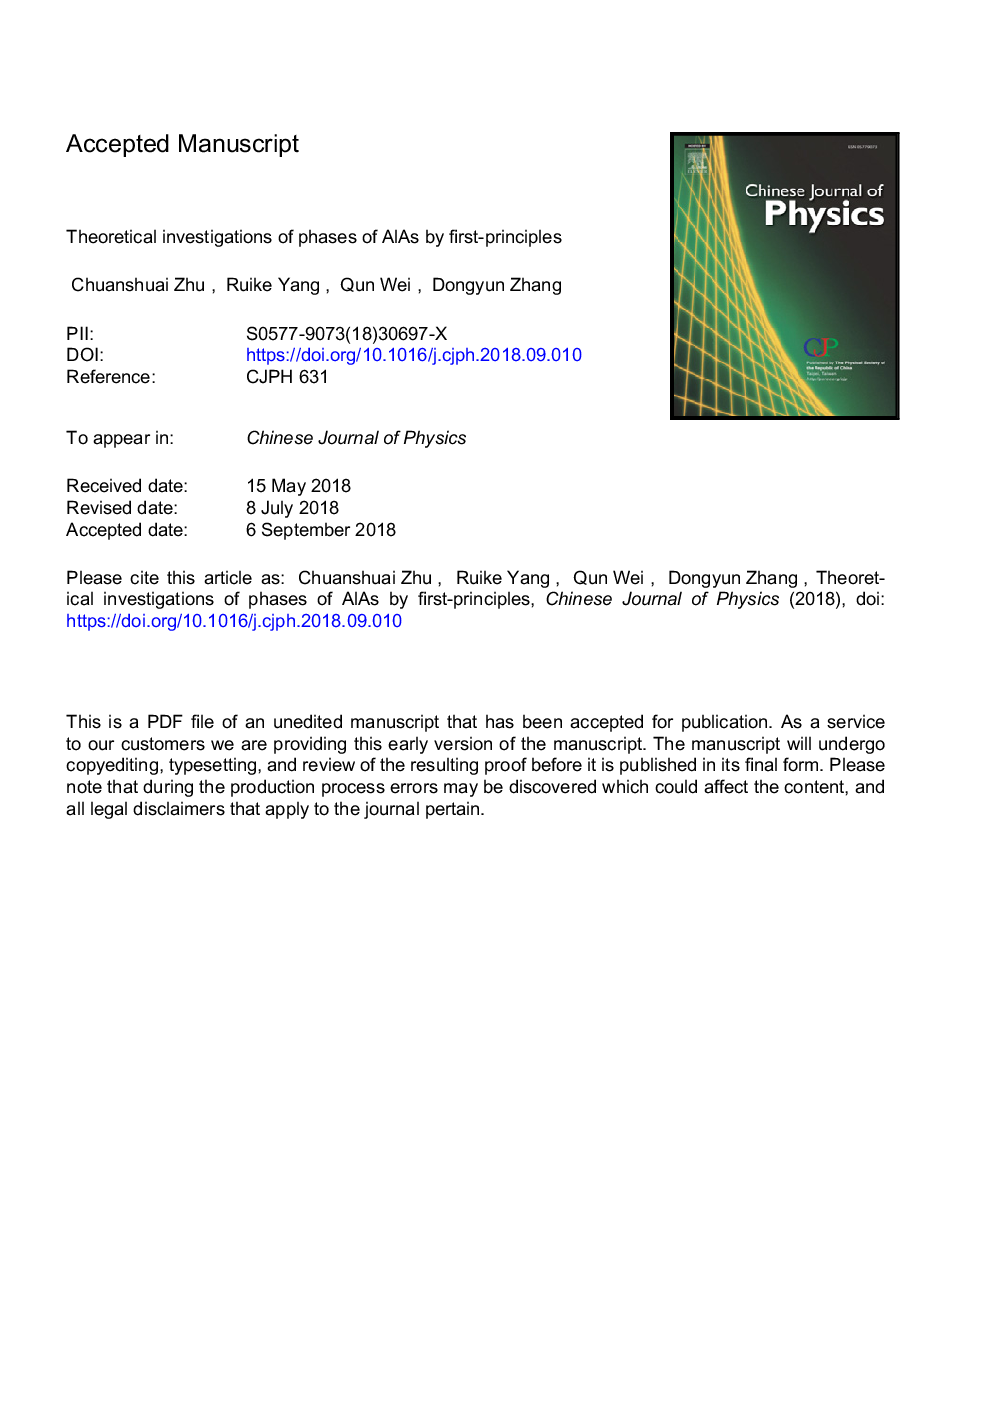 Theoretical investigations of phases of AlAs by first-principles